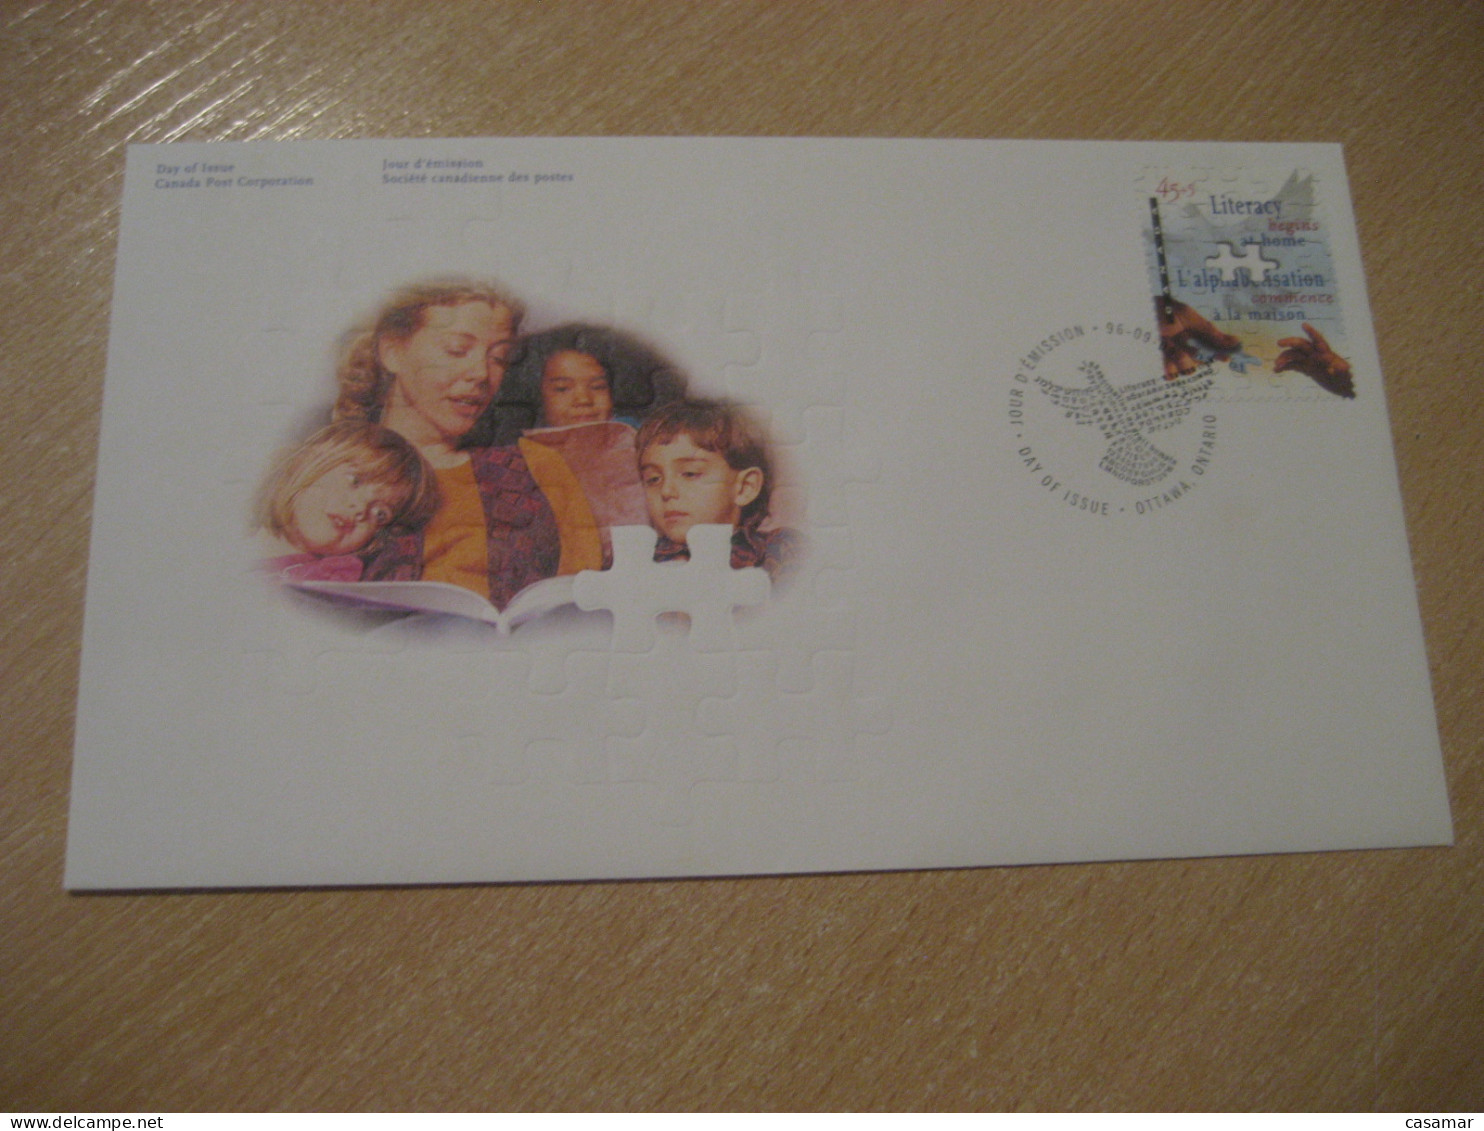 OTTAWA 1996 Yvert 1487 Alphabetisation Learn To Read Family Literacy Programs Puzzle FDC Cancel Cover CANADA - 1991-2000